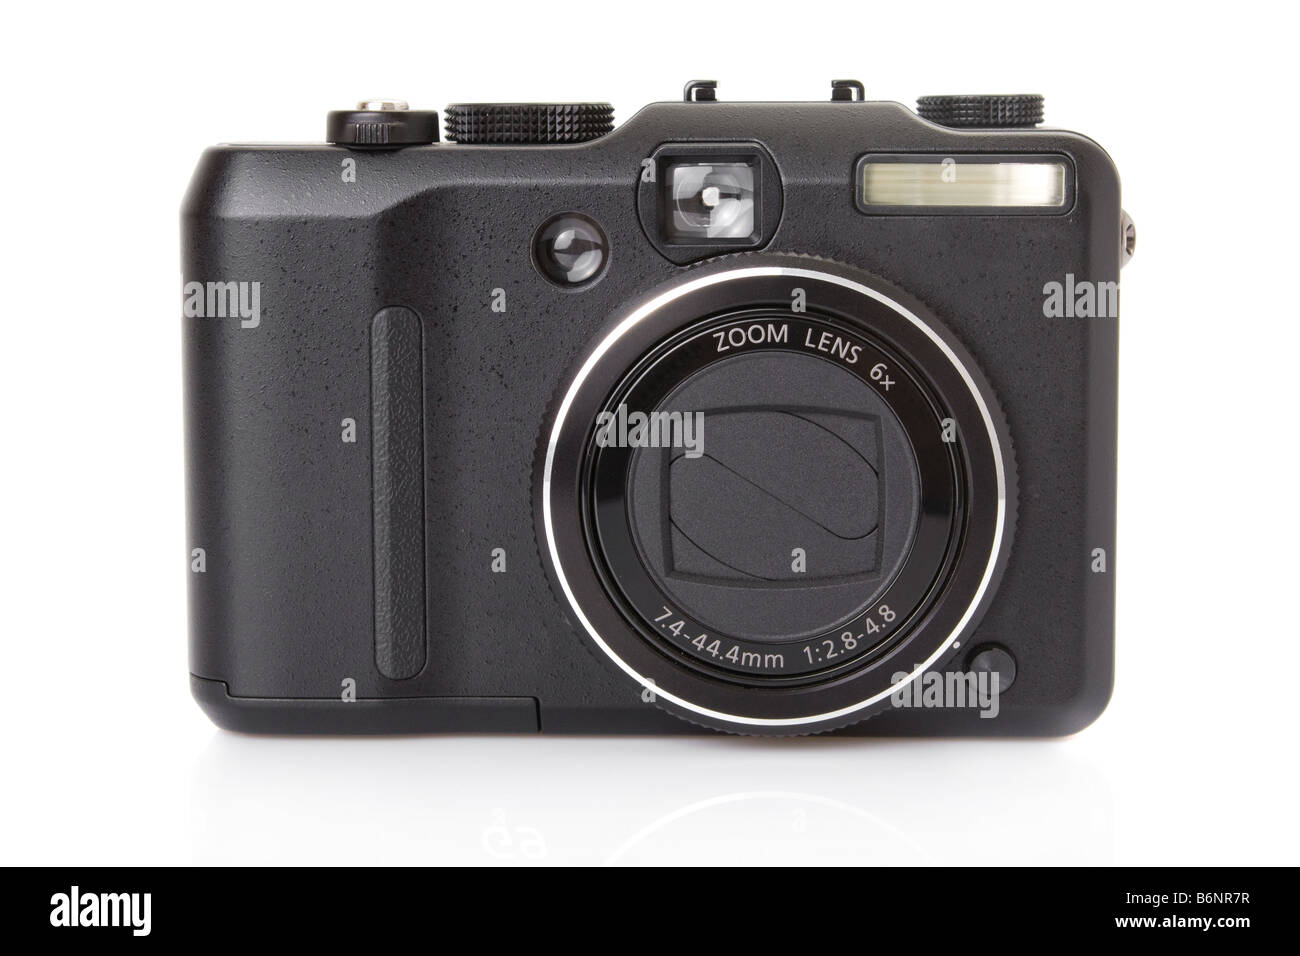 front of a black digital compact camera with retracted lens Stock Photo